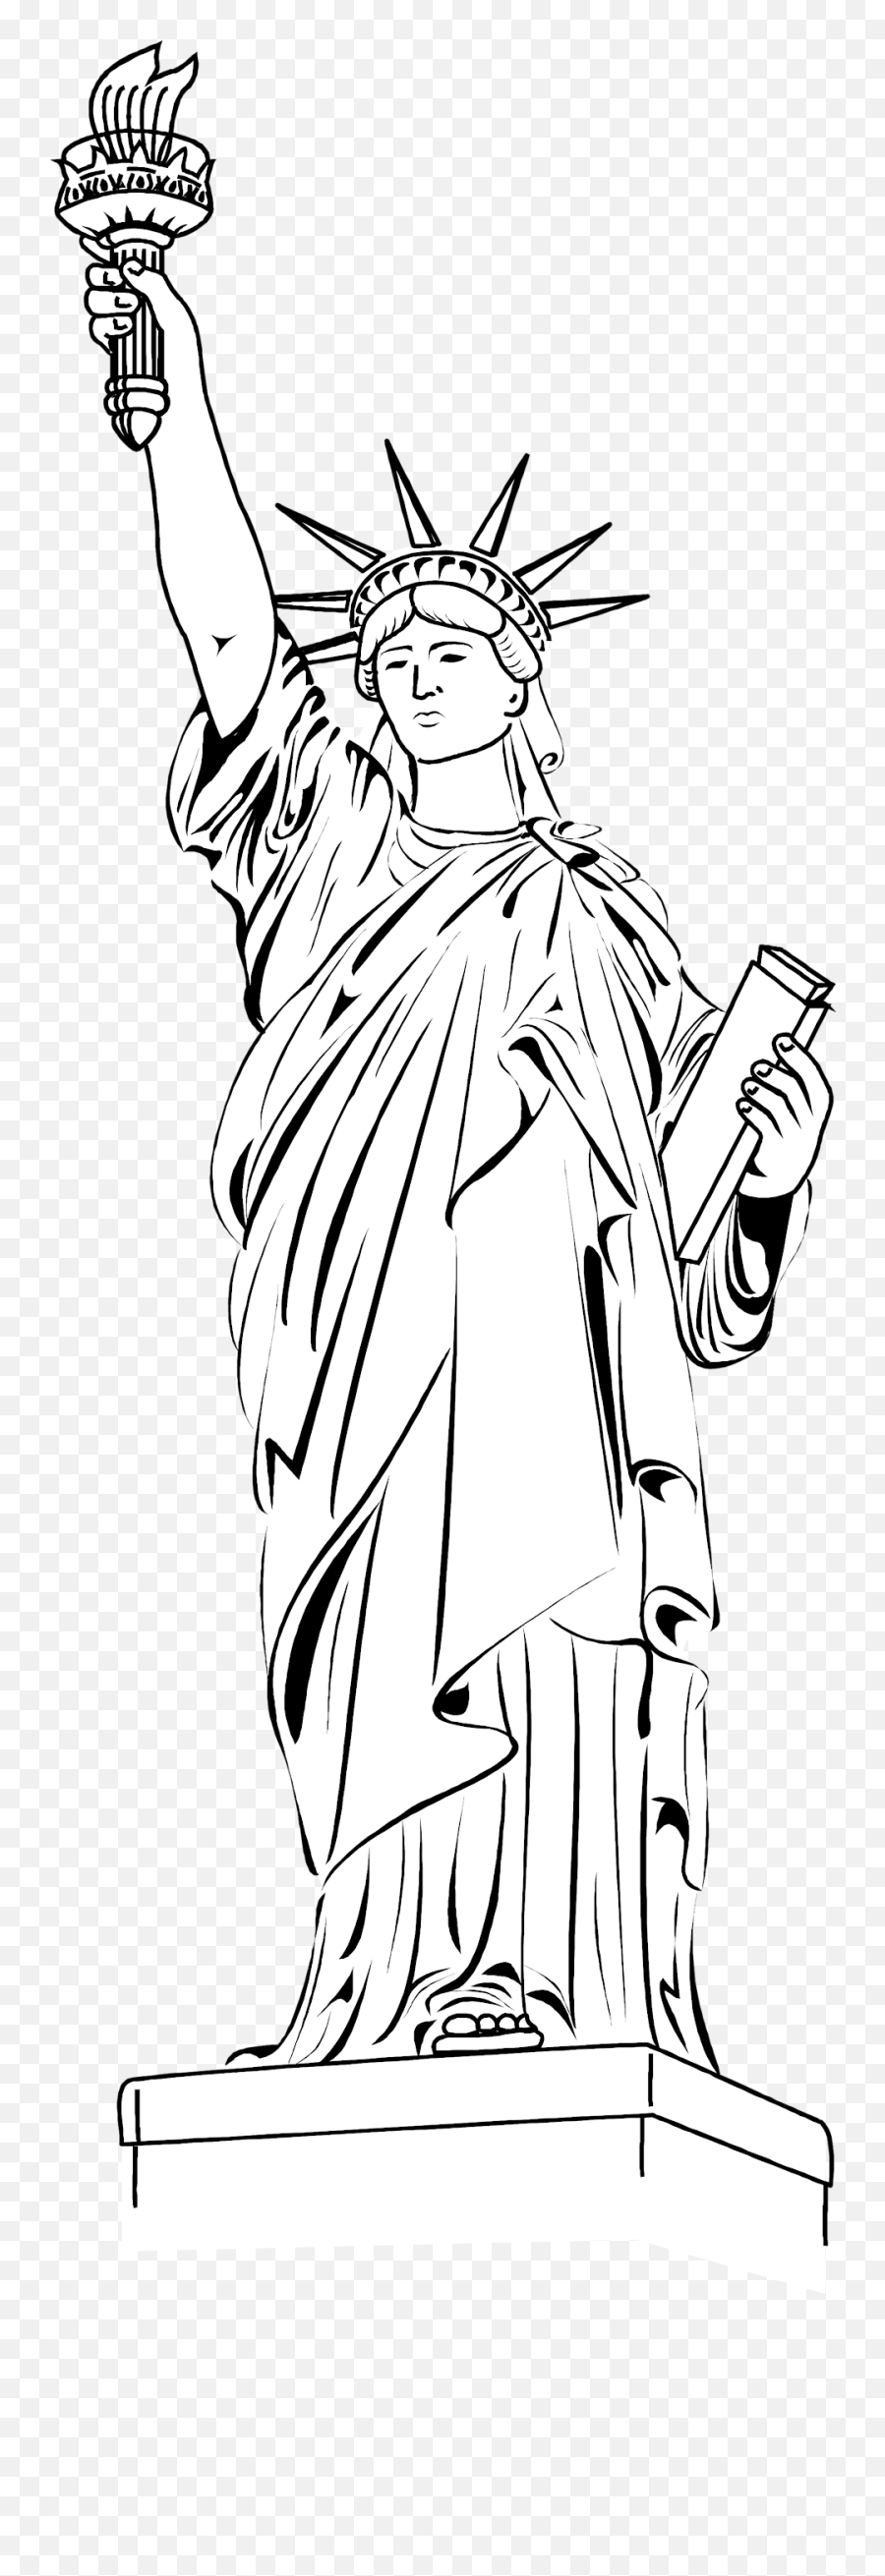 Download Of Liberty Free Stock - Statue Of Liberty Black White Statue Of Liberty Images Black Background Png,Statue Of Liberty Logos